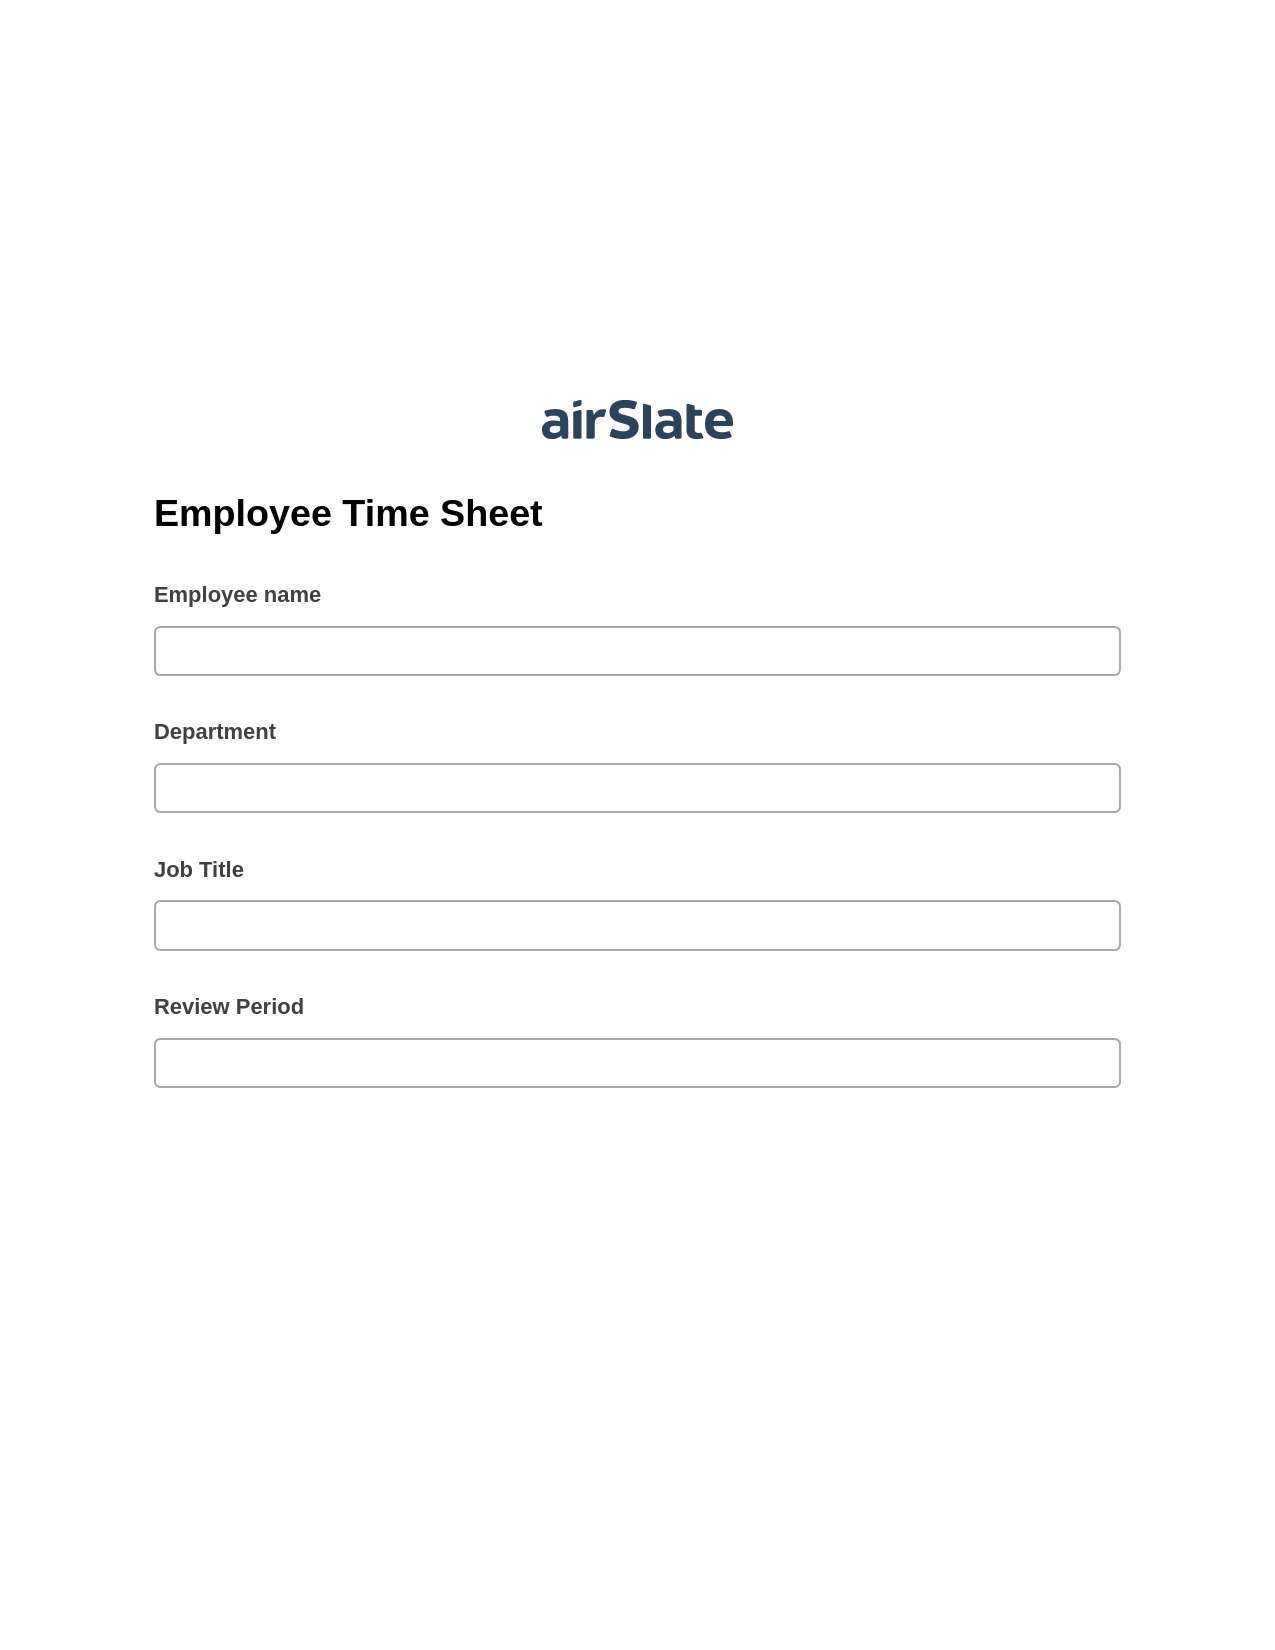 Multirole Employee Time Sheet Pre-fill Dropdowns from Airtable, Lock the Slate Bot, Webhook Postfinish Bot